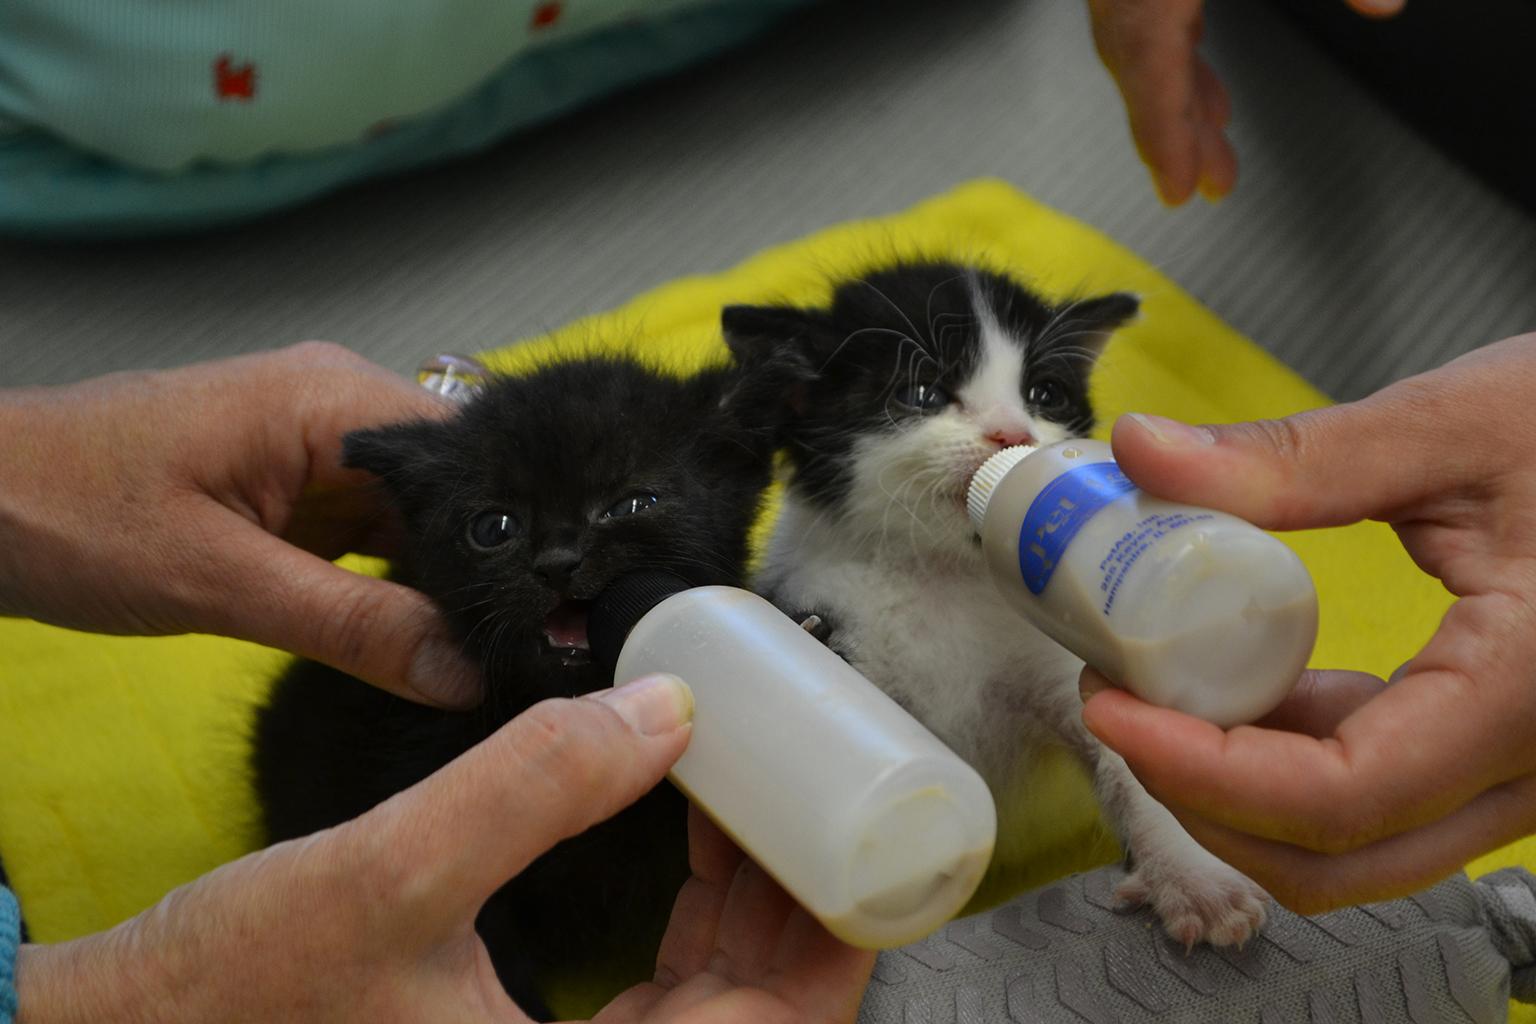 Jesus, left, and Juan are bottle fed at CACC’s shelter. (Alex Ruppenthal / Chicago Tonight)